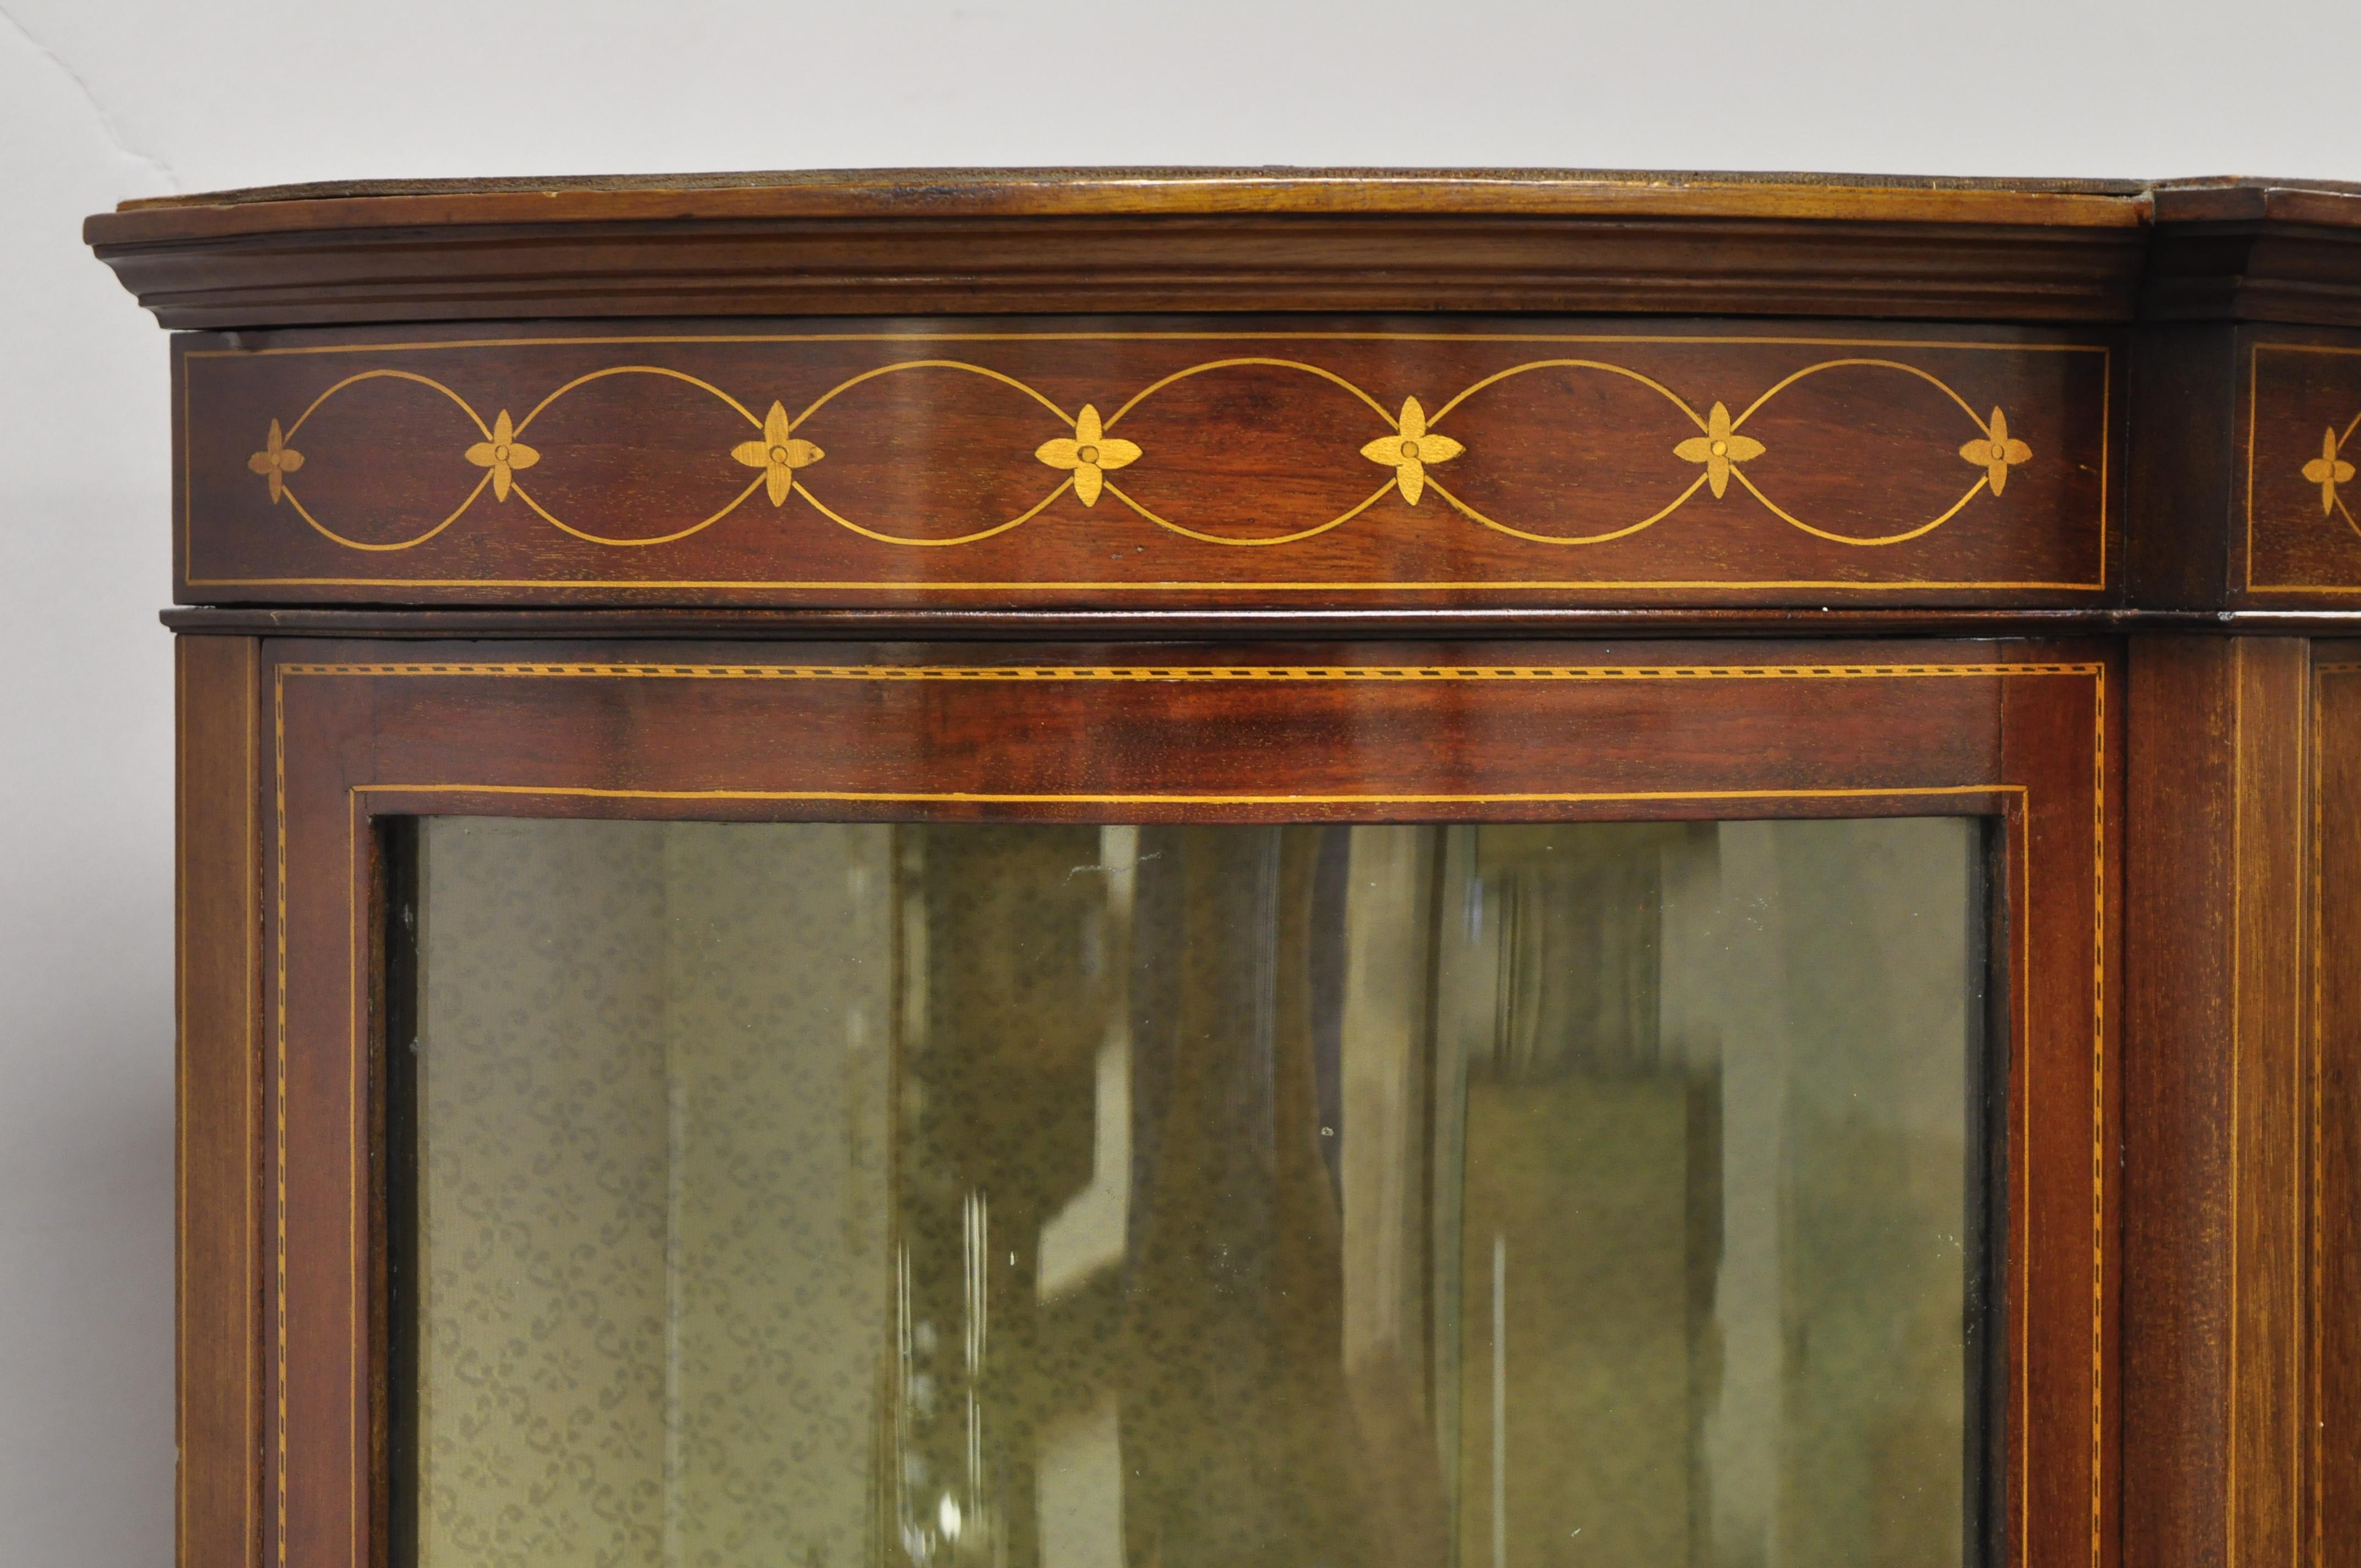 English Edwardian Satinwood Inlay Bowed Curved Glass China Display Cabinet Curio In Good Condition For Sale In Philadelphia, PA